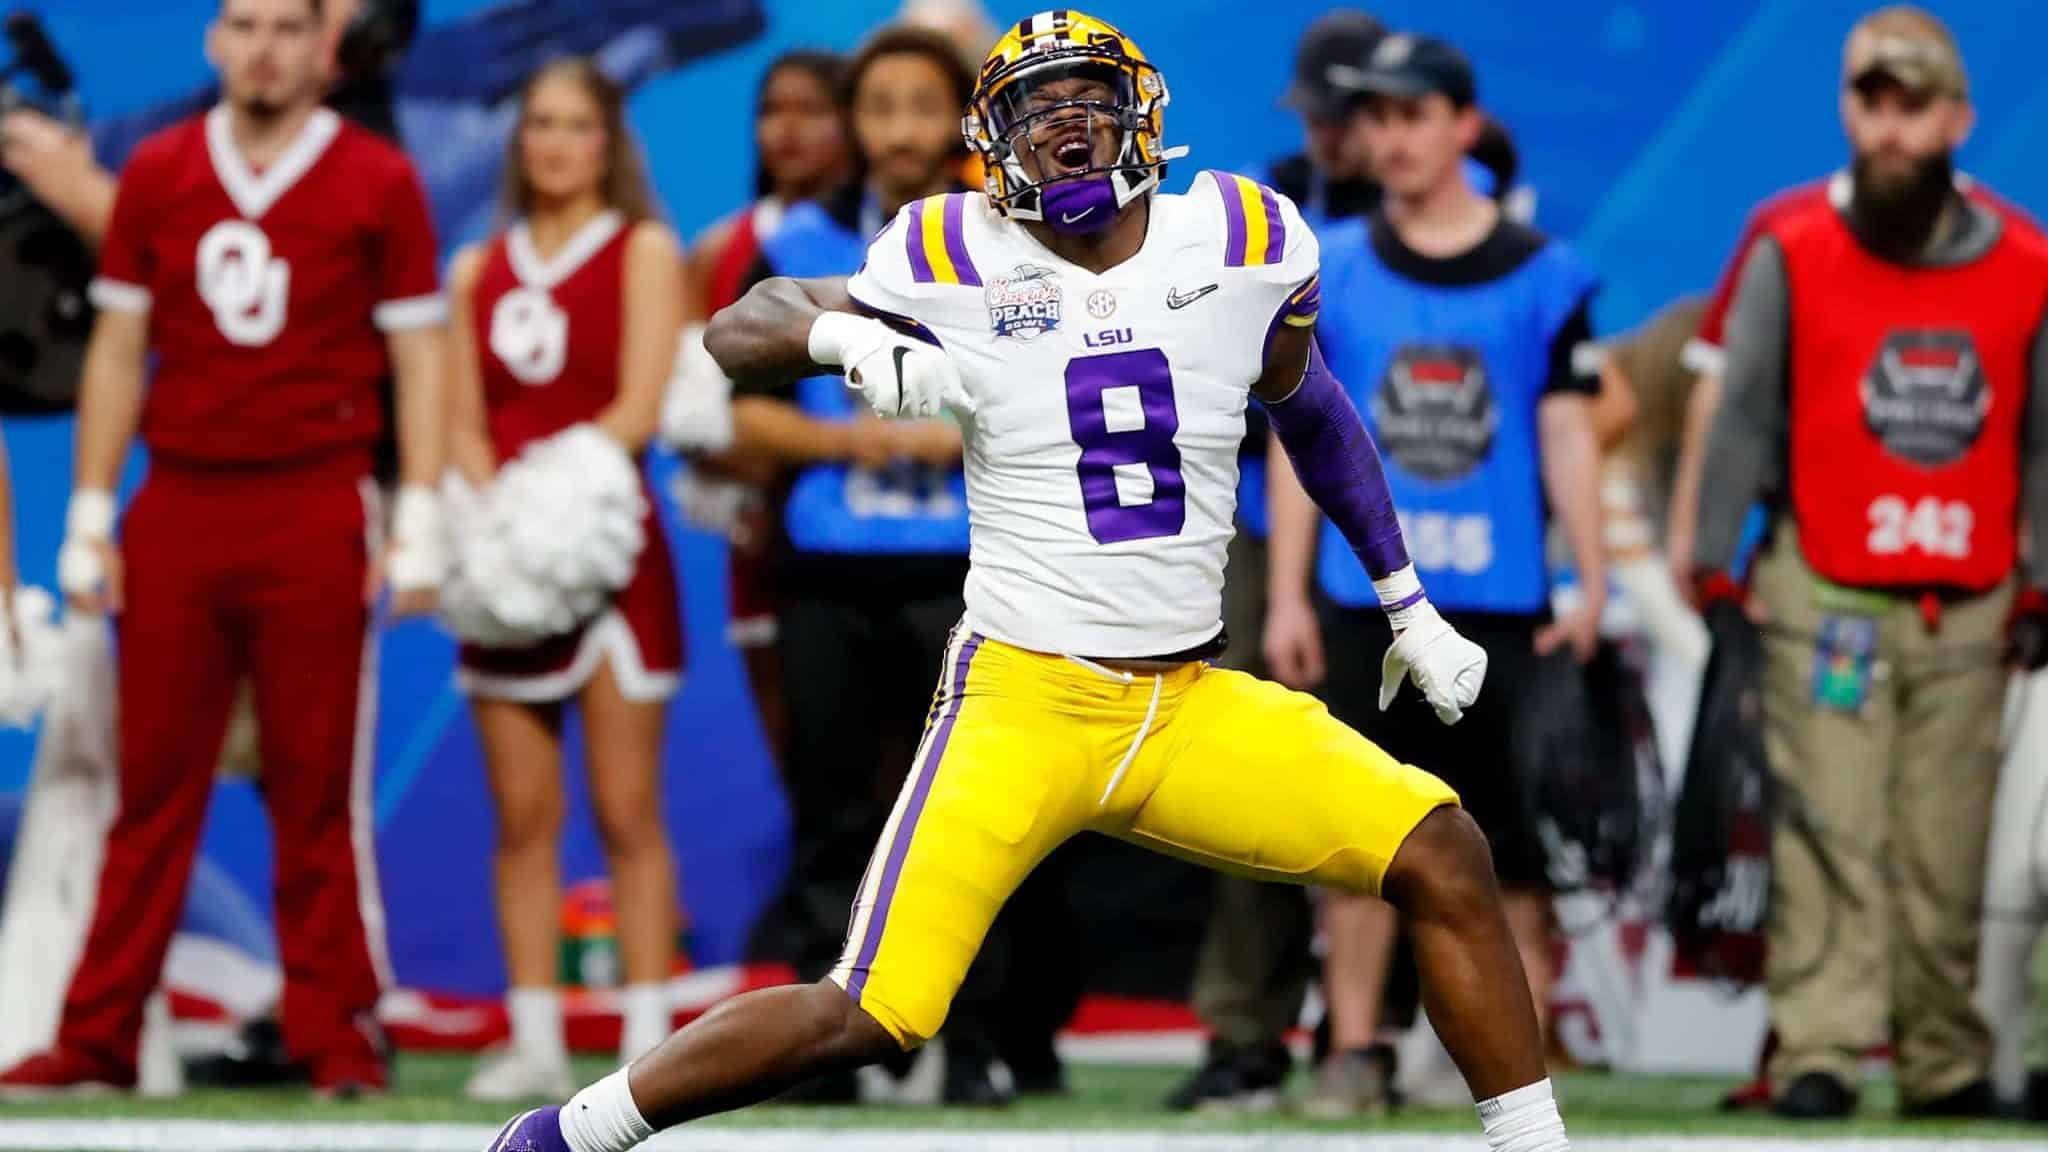 ATLANTA, GEORGIA - DECEMBER 28: Linebacker Patrick Queen #8 of the LSU Tigers celebrates a defensive play against the Oklahoma Sooners during the Chick-fil-A Peach Bowl at Mercedes-Benz Stadium on December 28, 2019 in Atlanta, Georgia.